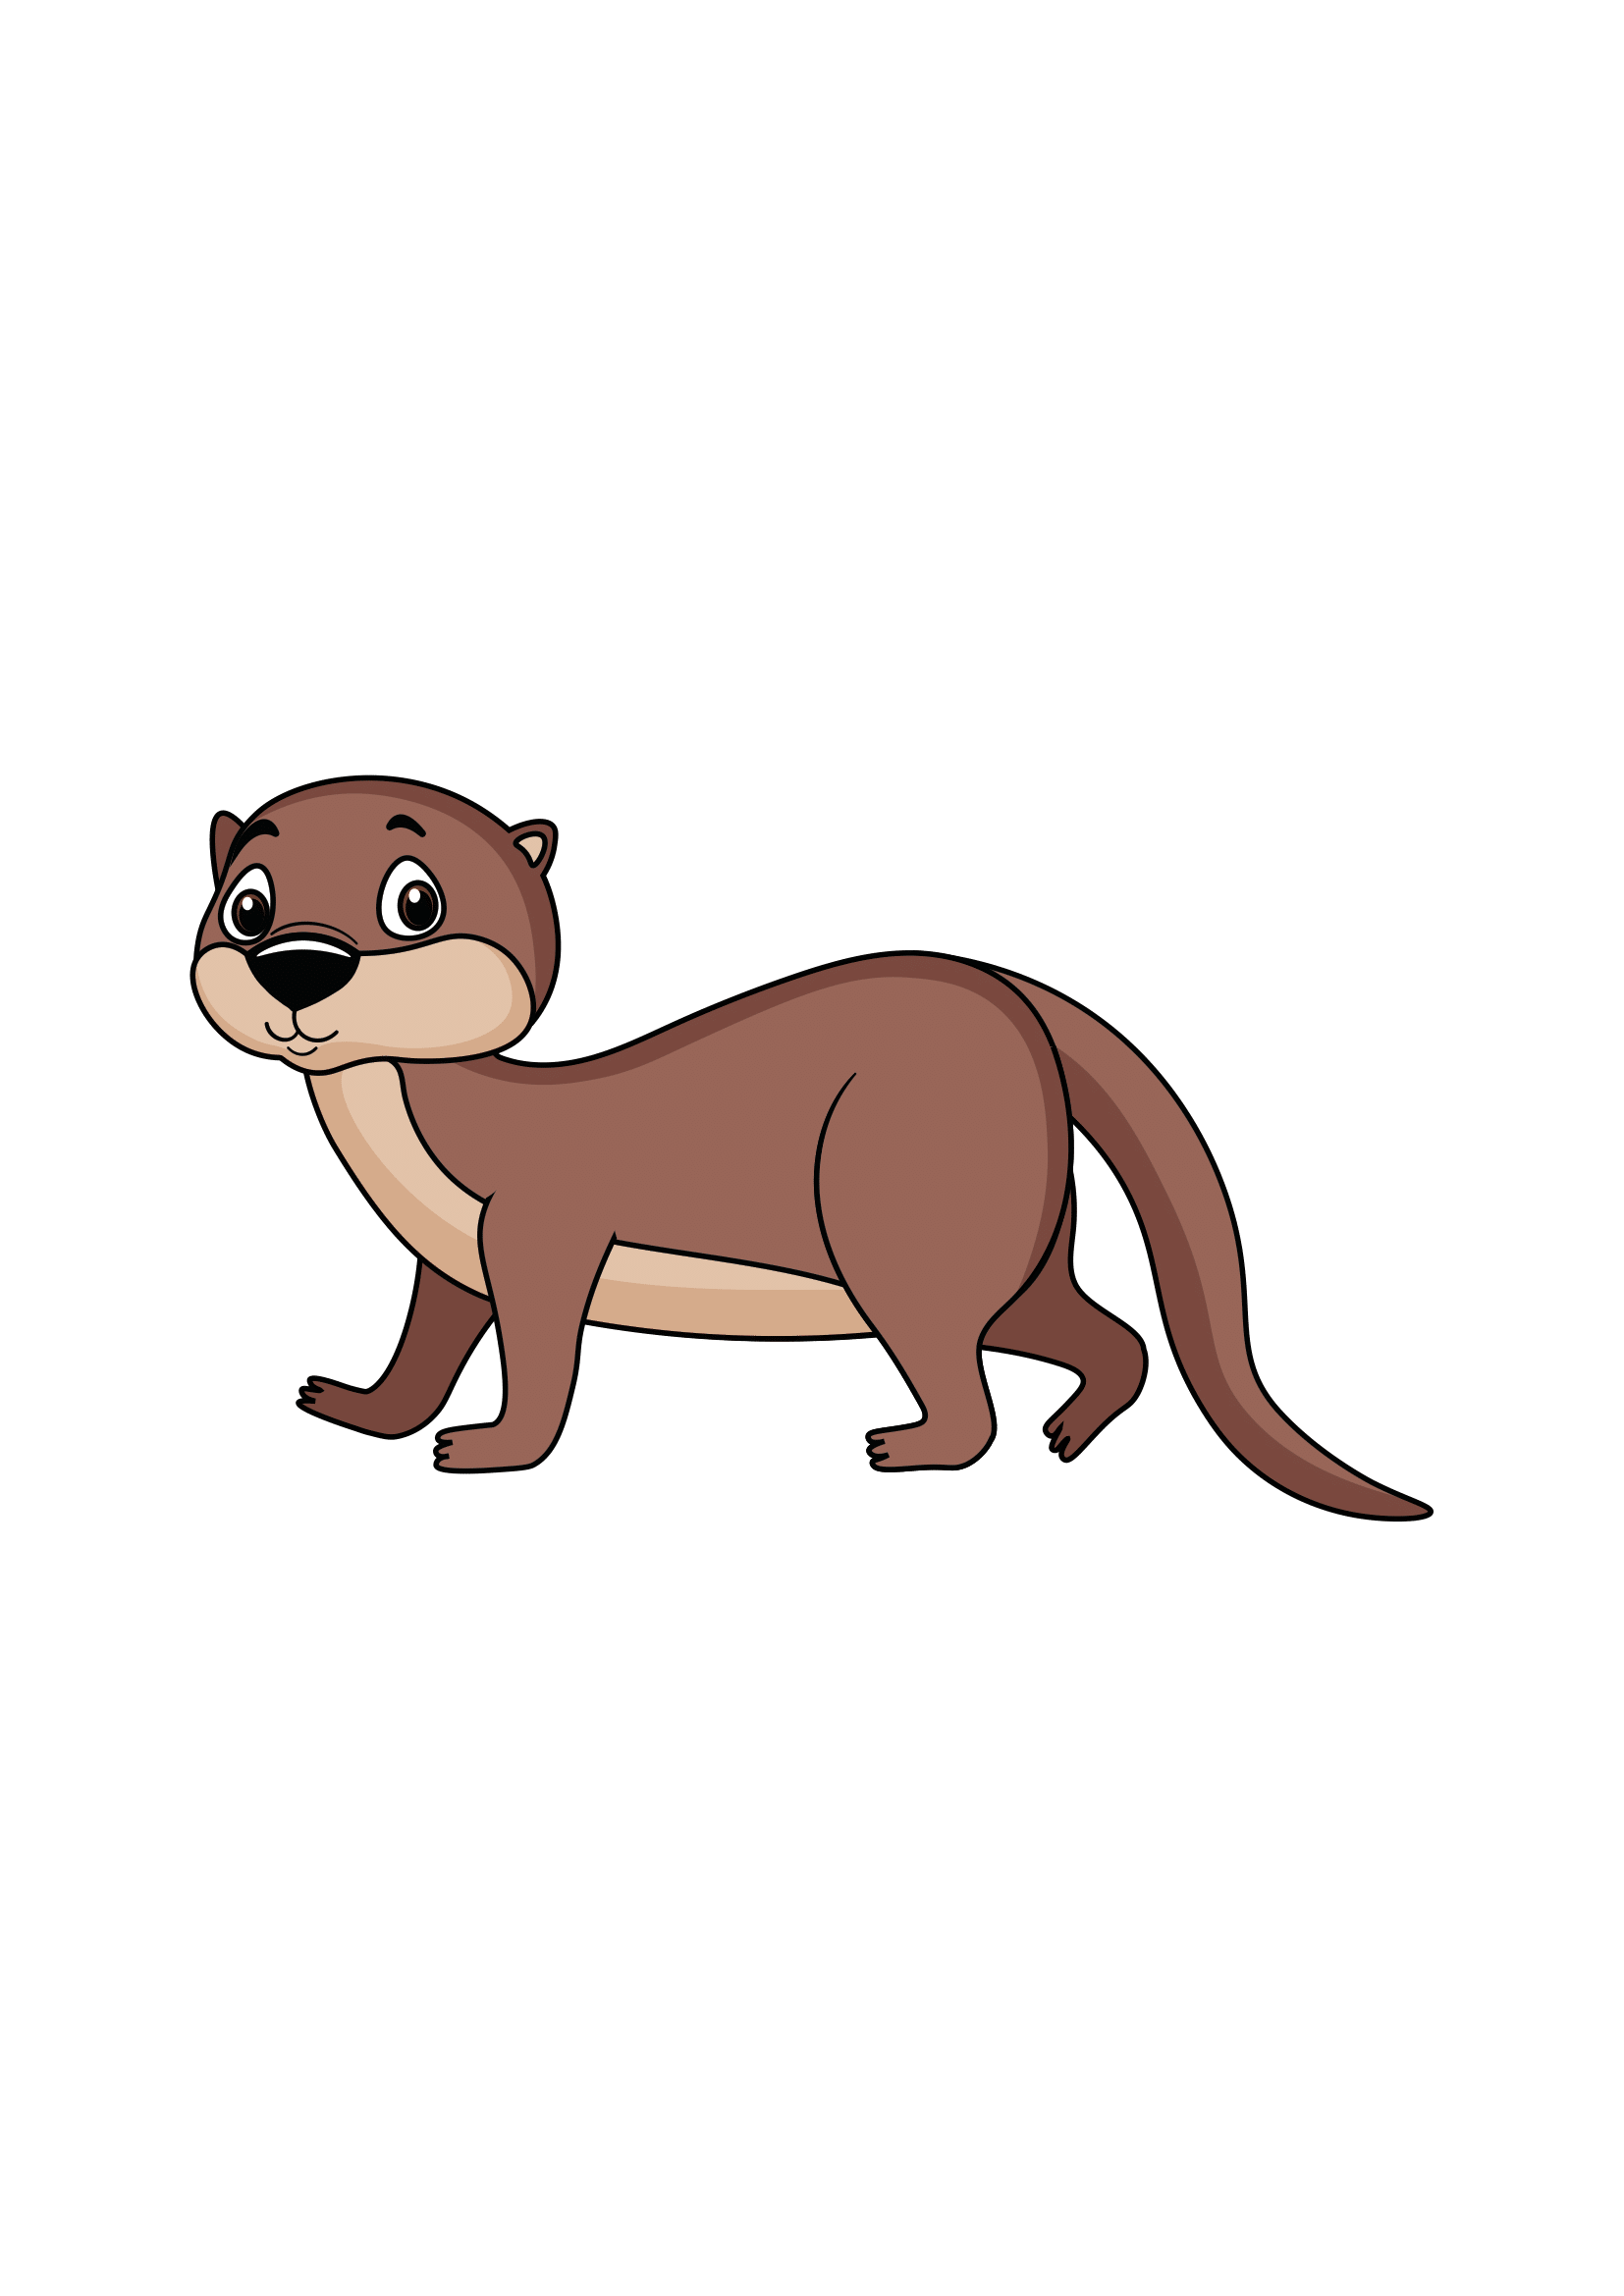 How to Draw An Otter Step by Step Printable